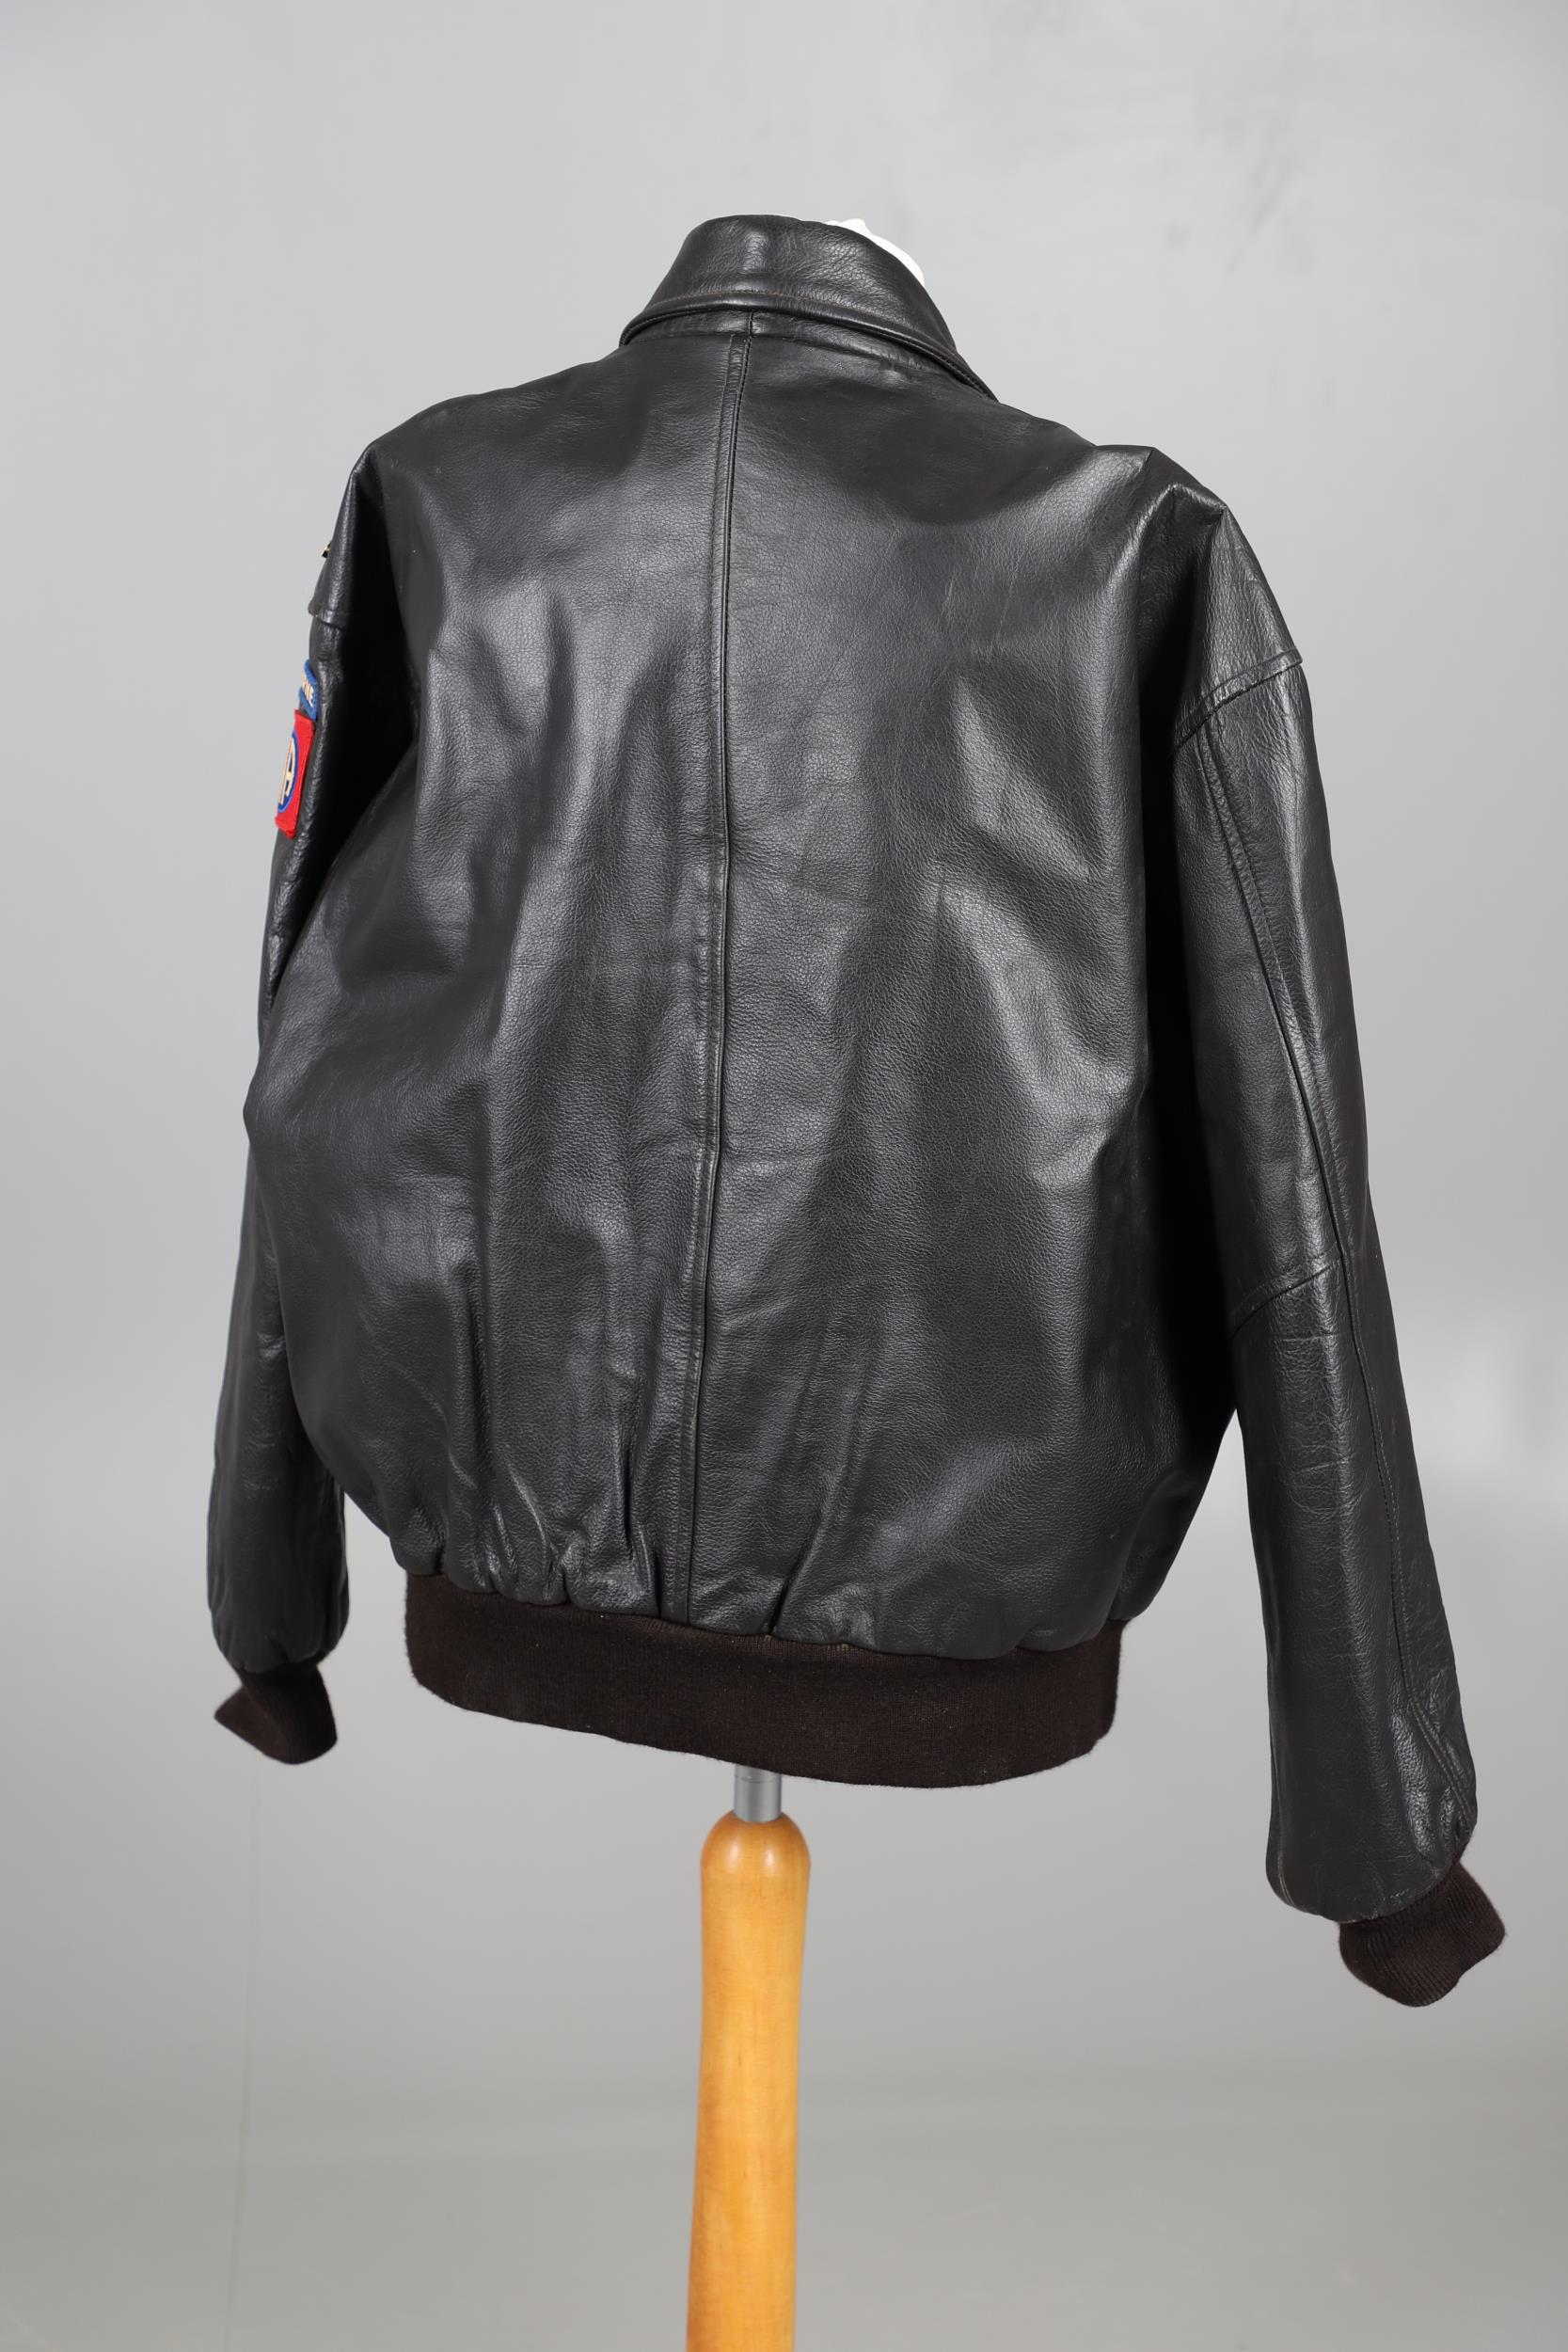 A FLIGHT TECH INC. TYPE A-2C LEATHER FLYING JACKET. - Image 9 of 12